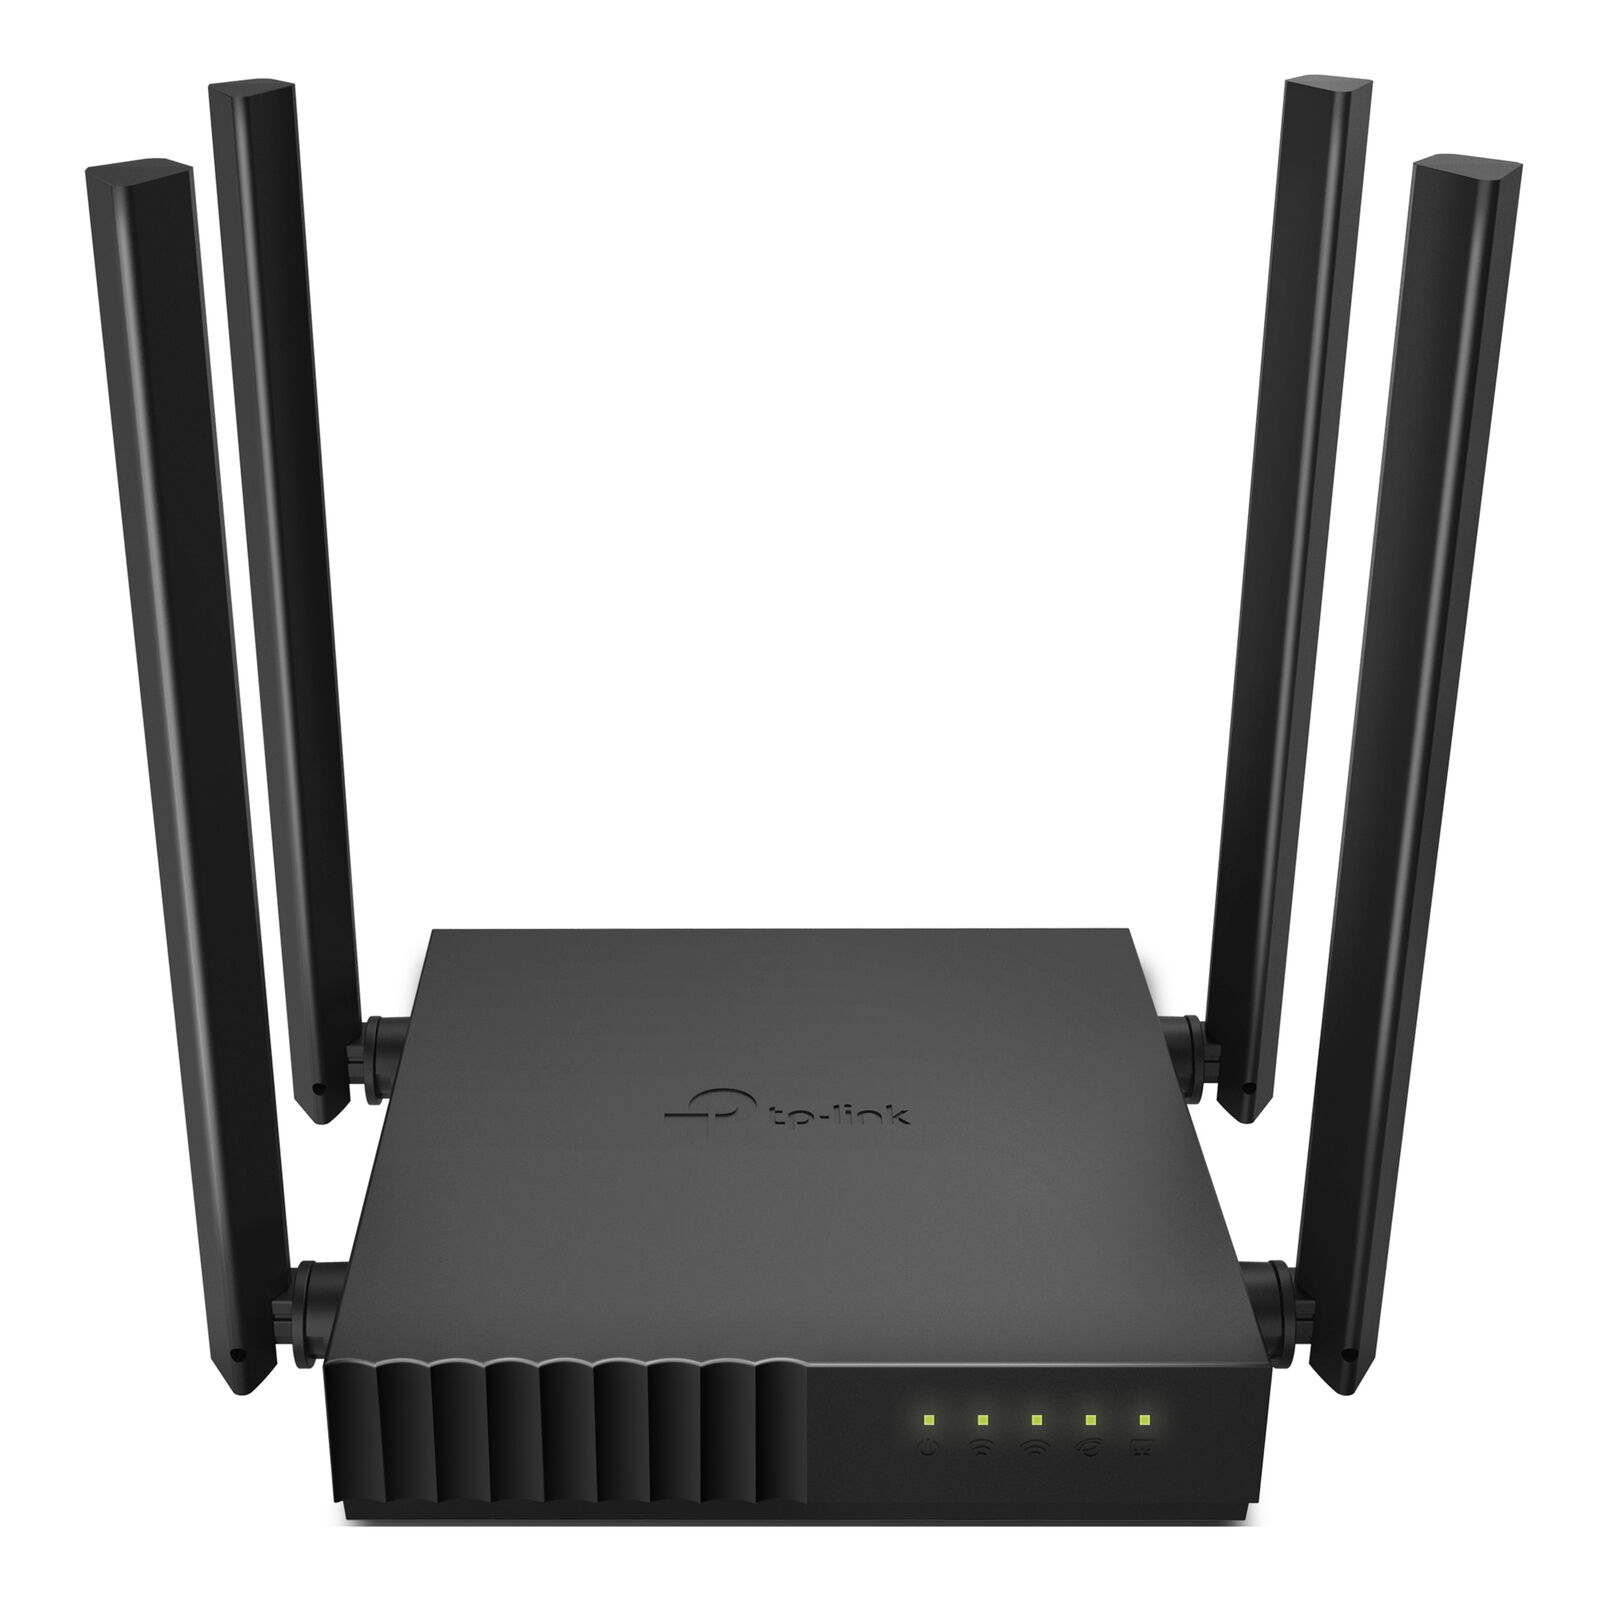 TP-Link Archer C54 | AC1200 MU-MIMO Dual-Band WiFi Router| Works